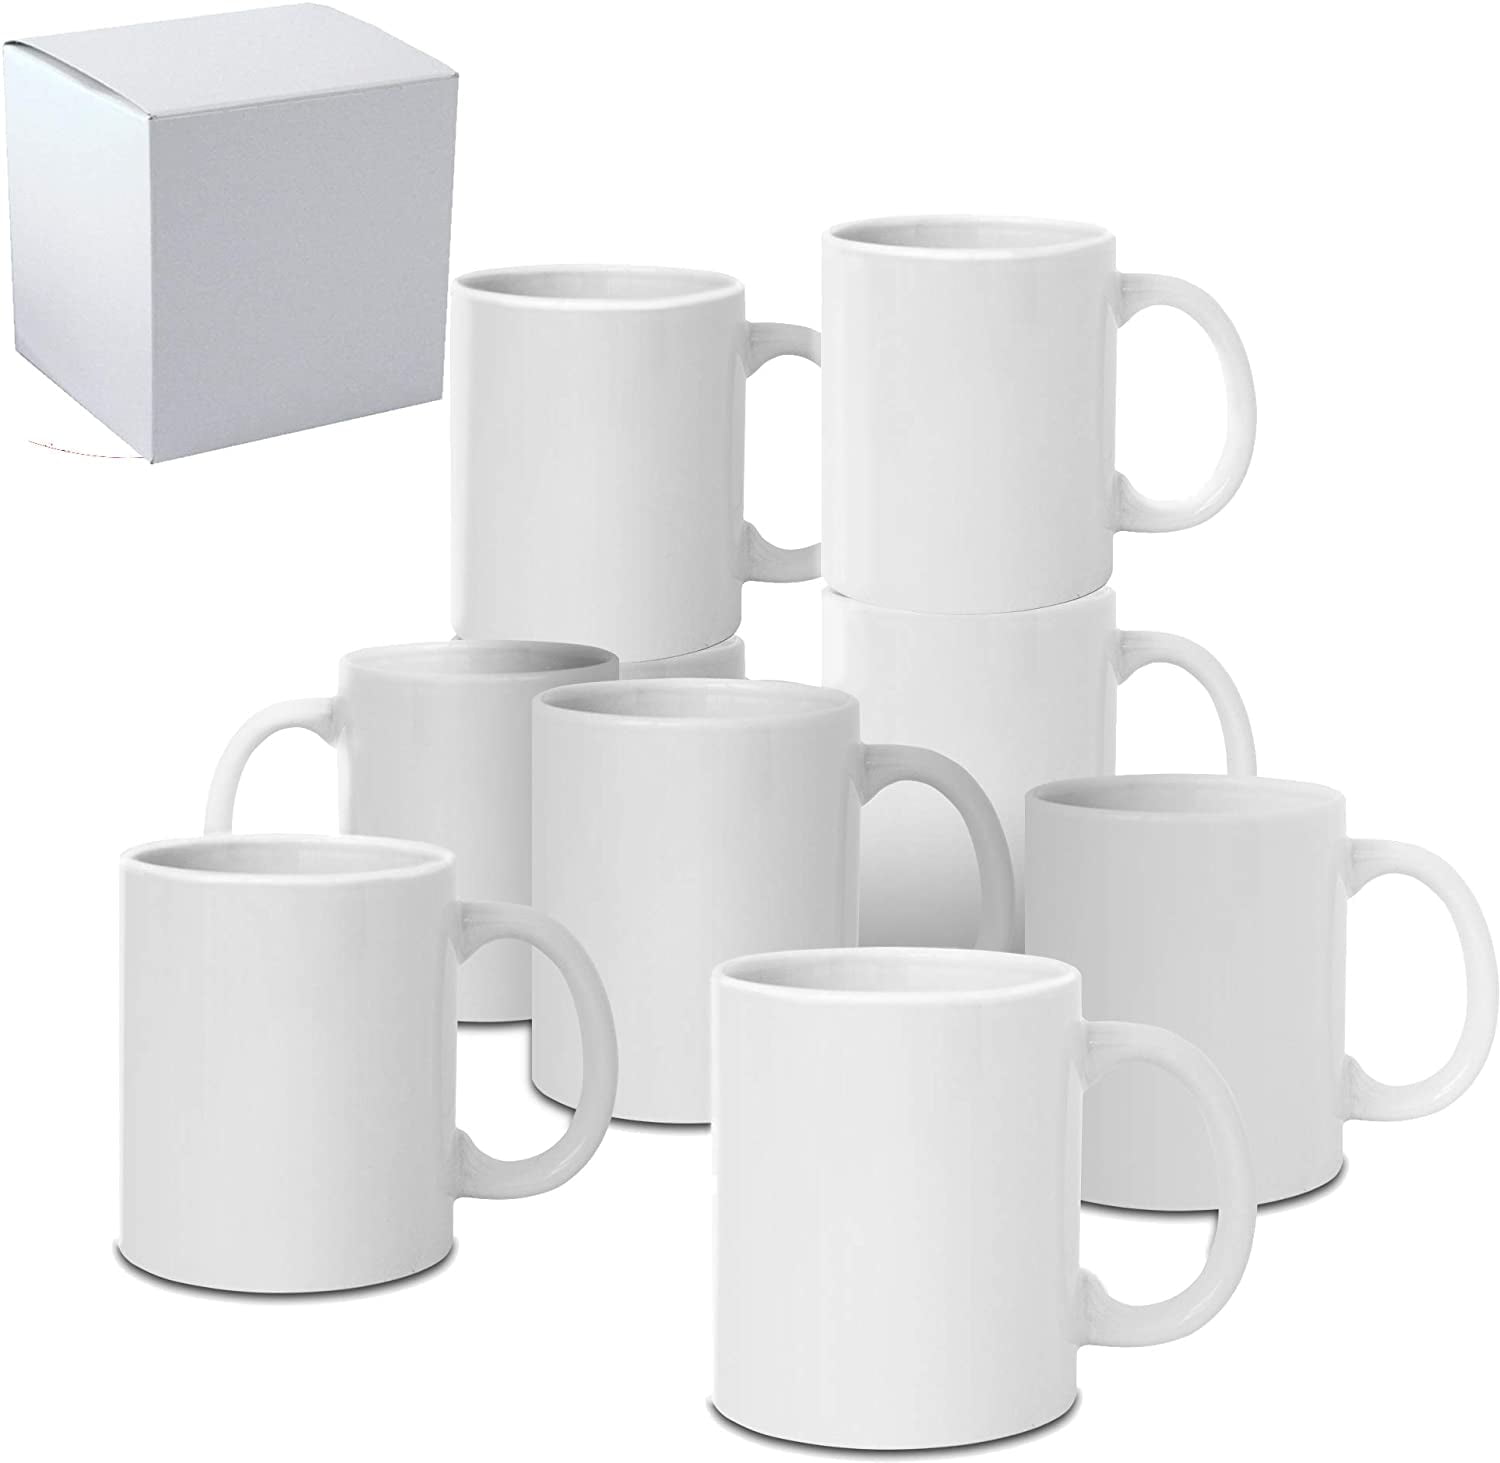  GBHOME Sublimation Mugs Blank, 12 OZ White Ceramic Sublimation  Cups, Bulk Mugs for Coffee, Milk, Latte, Hot Cocoa, Set of 4 : Home &  Kitchen